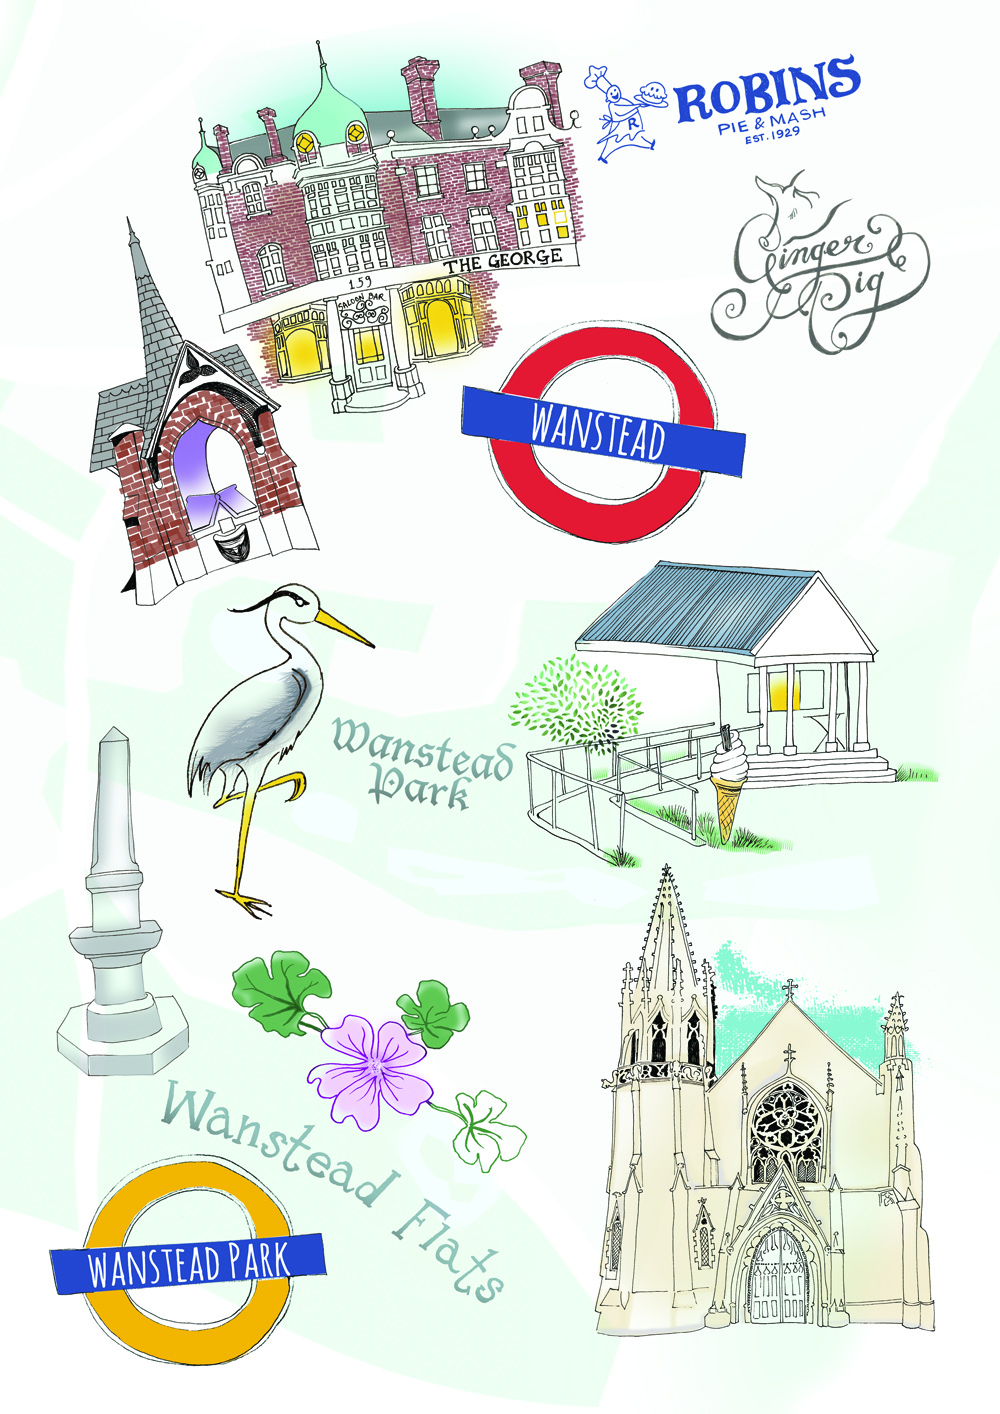 Wanstead illustration used in area guide by Trading Places Estate Agency